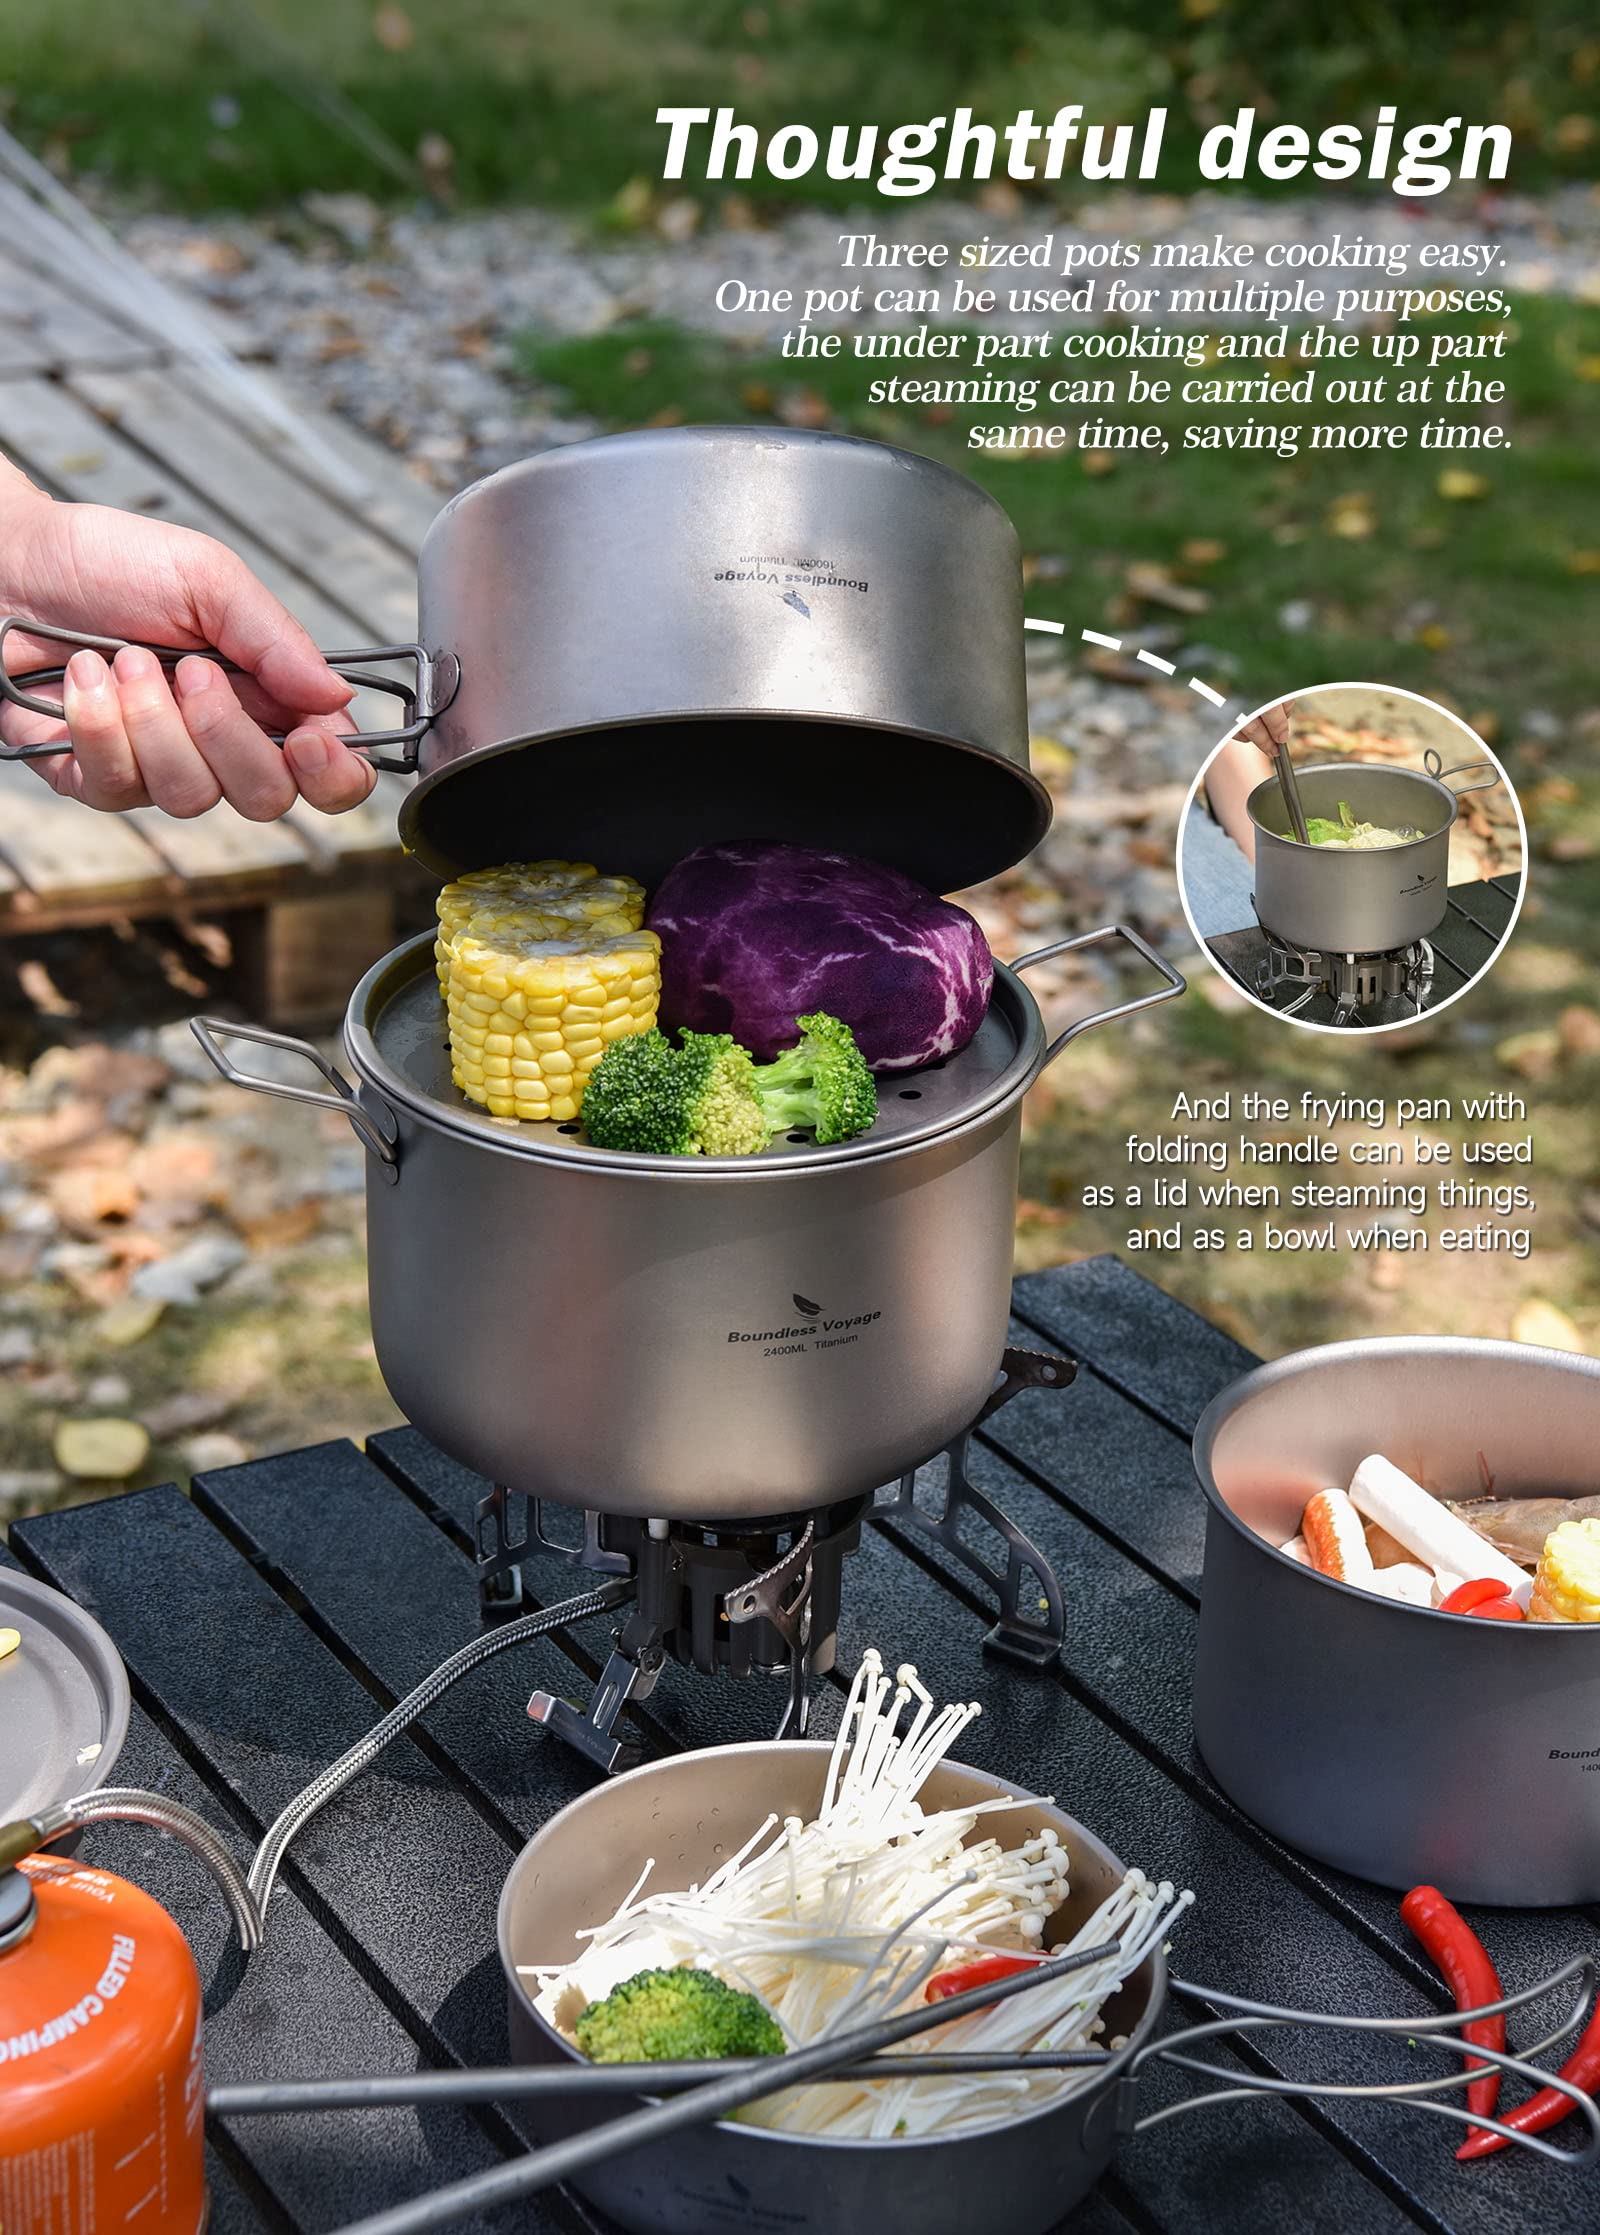 Boundless Voyage Camping Cookware Lightweight Cooking Pot Set Titanium Pot Portable for Outdoor Cooking Traveling Hiking Trekking Backpacking, 1-5 Person (107C-108C-29P)